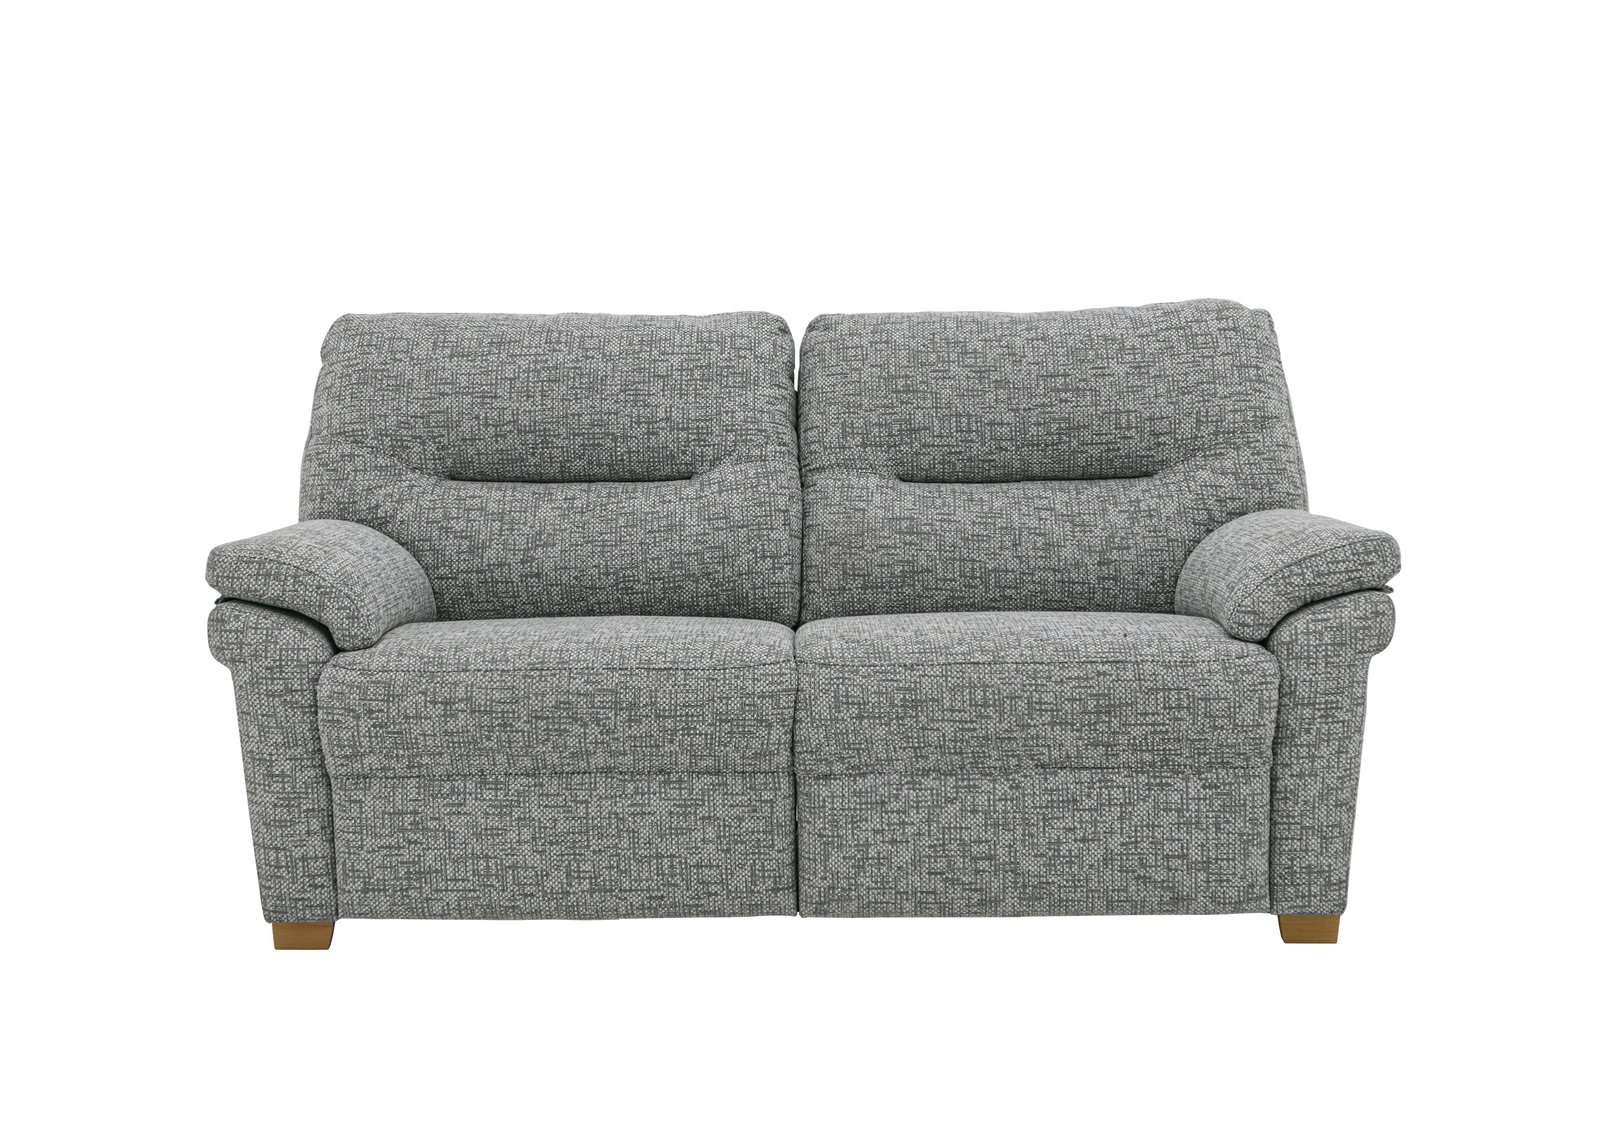 Seattle 2.5 Seater Fabric Sofa with Wooden Feet in B030 Remco Light Grey Ok on Furniture Village